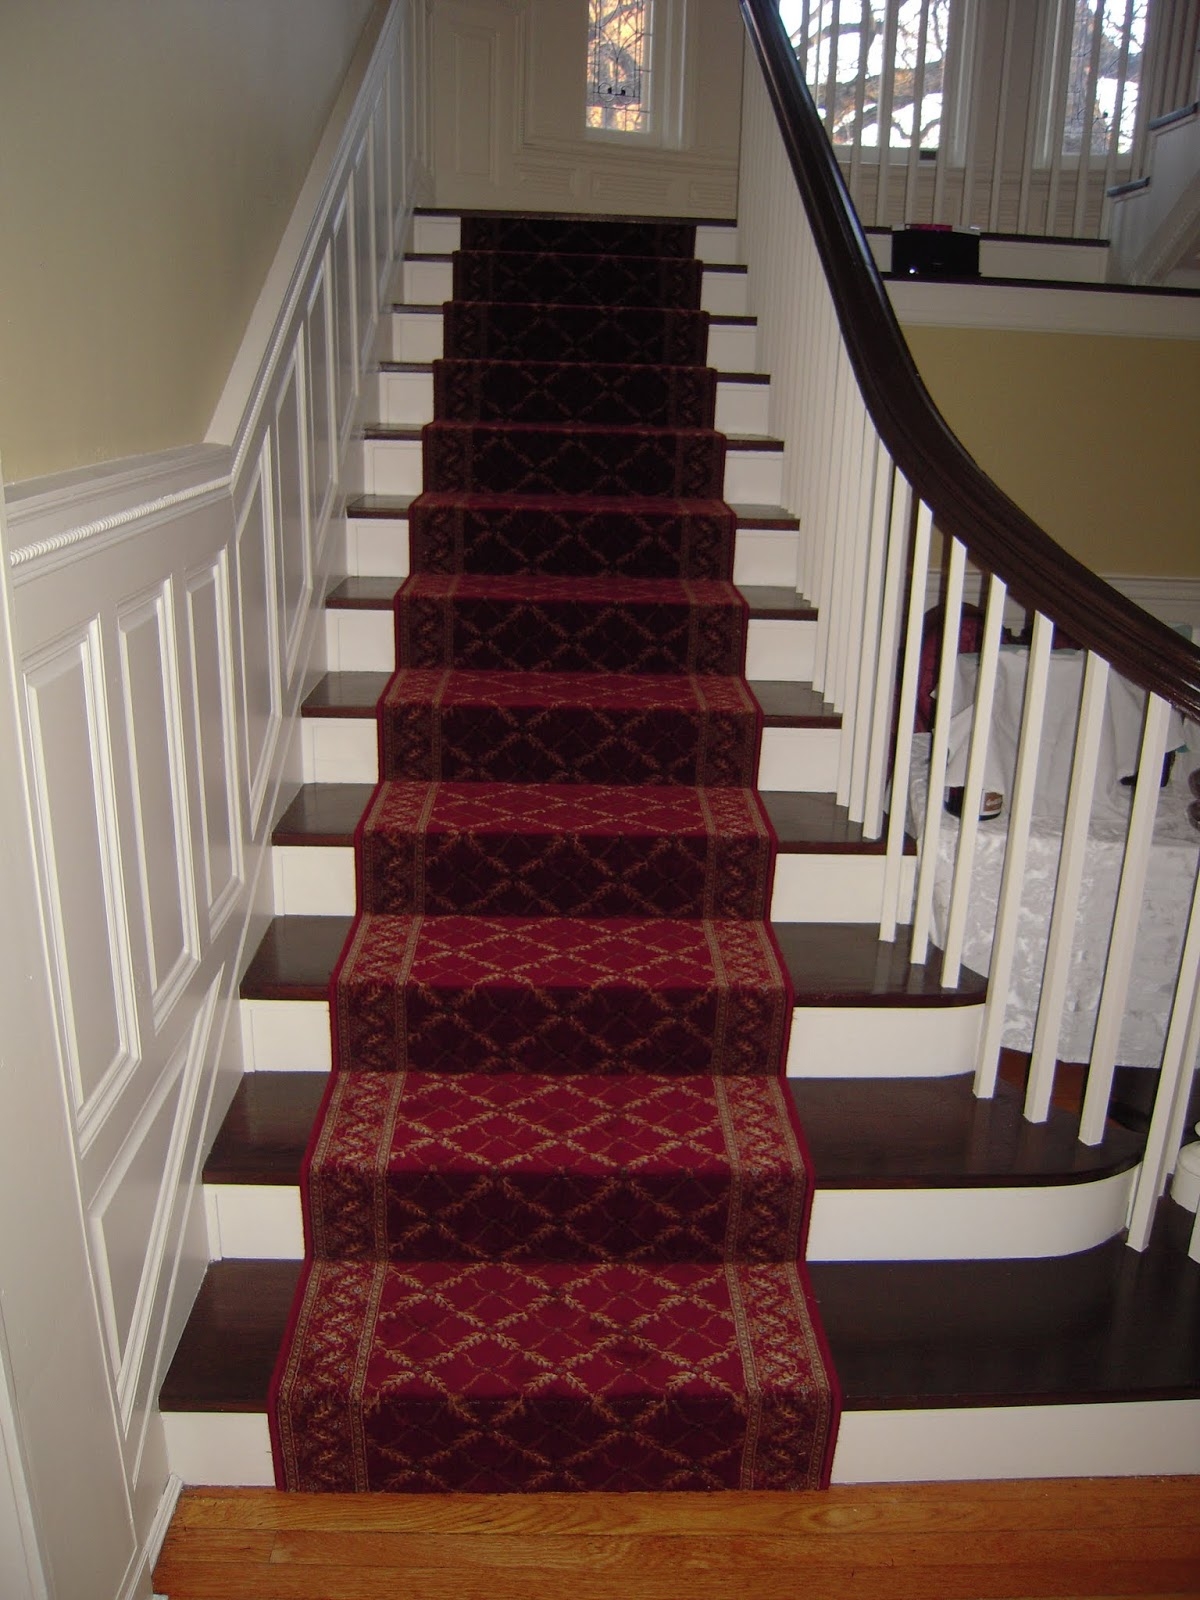 carpet runners for stairs modern photo - 2